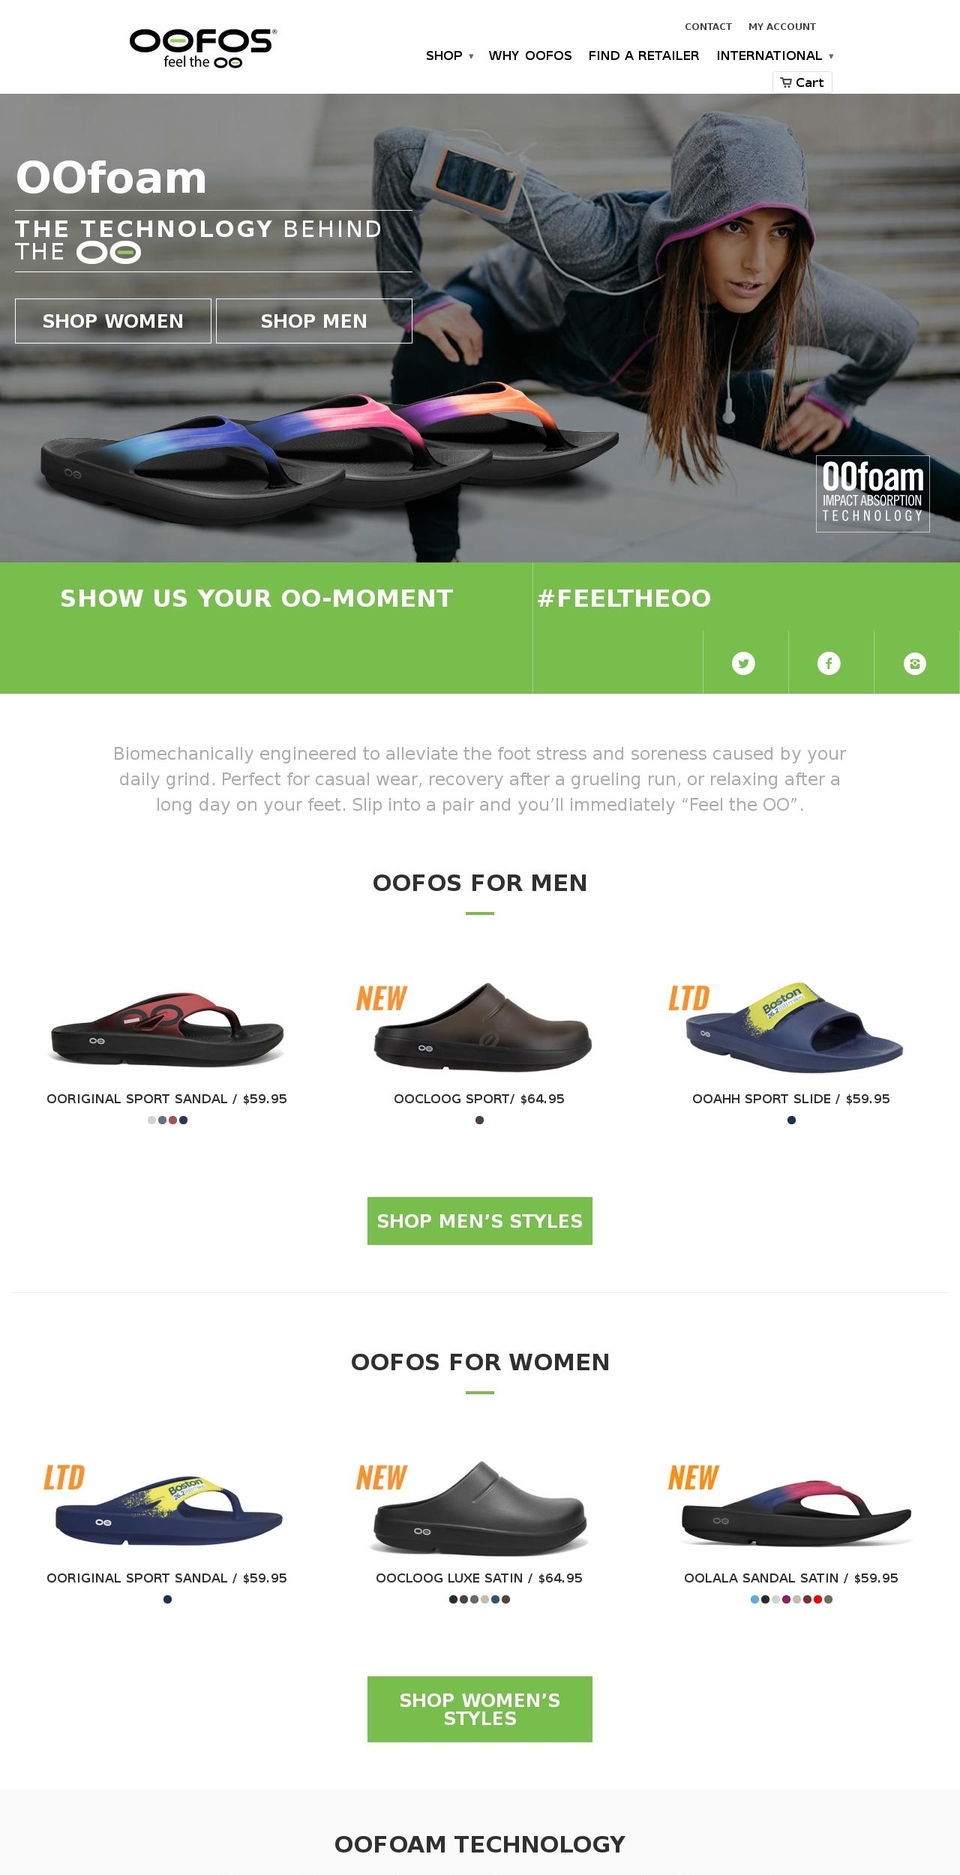 Production Shopify theme site example oofos.com